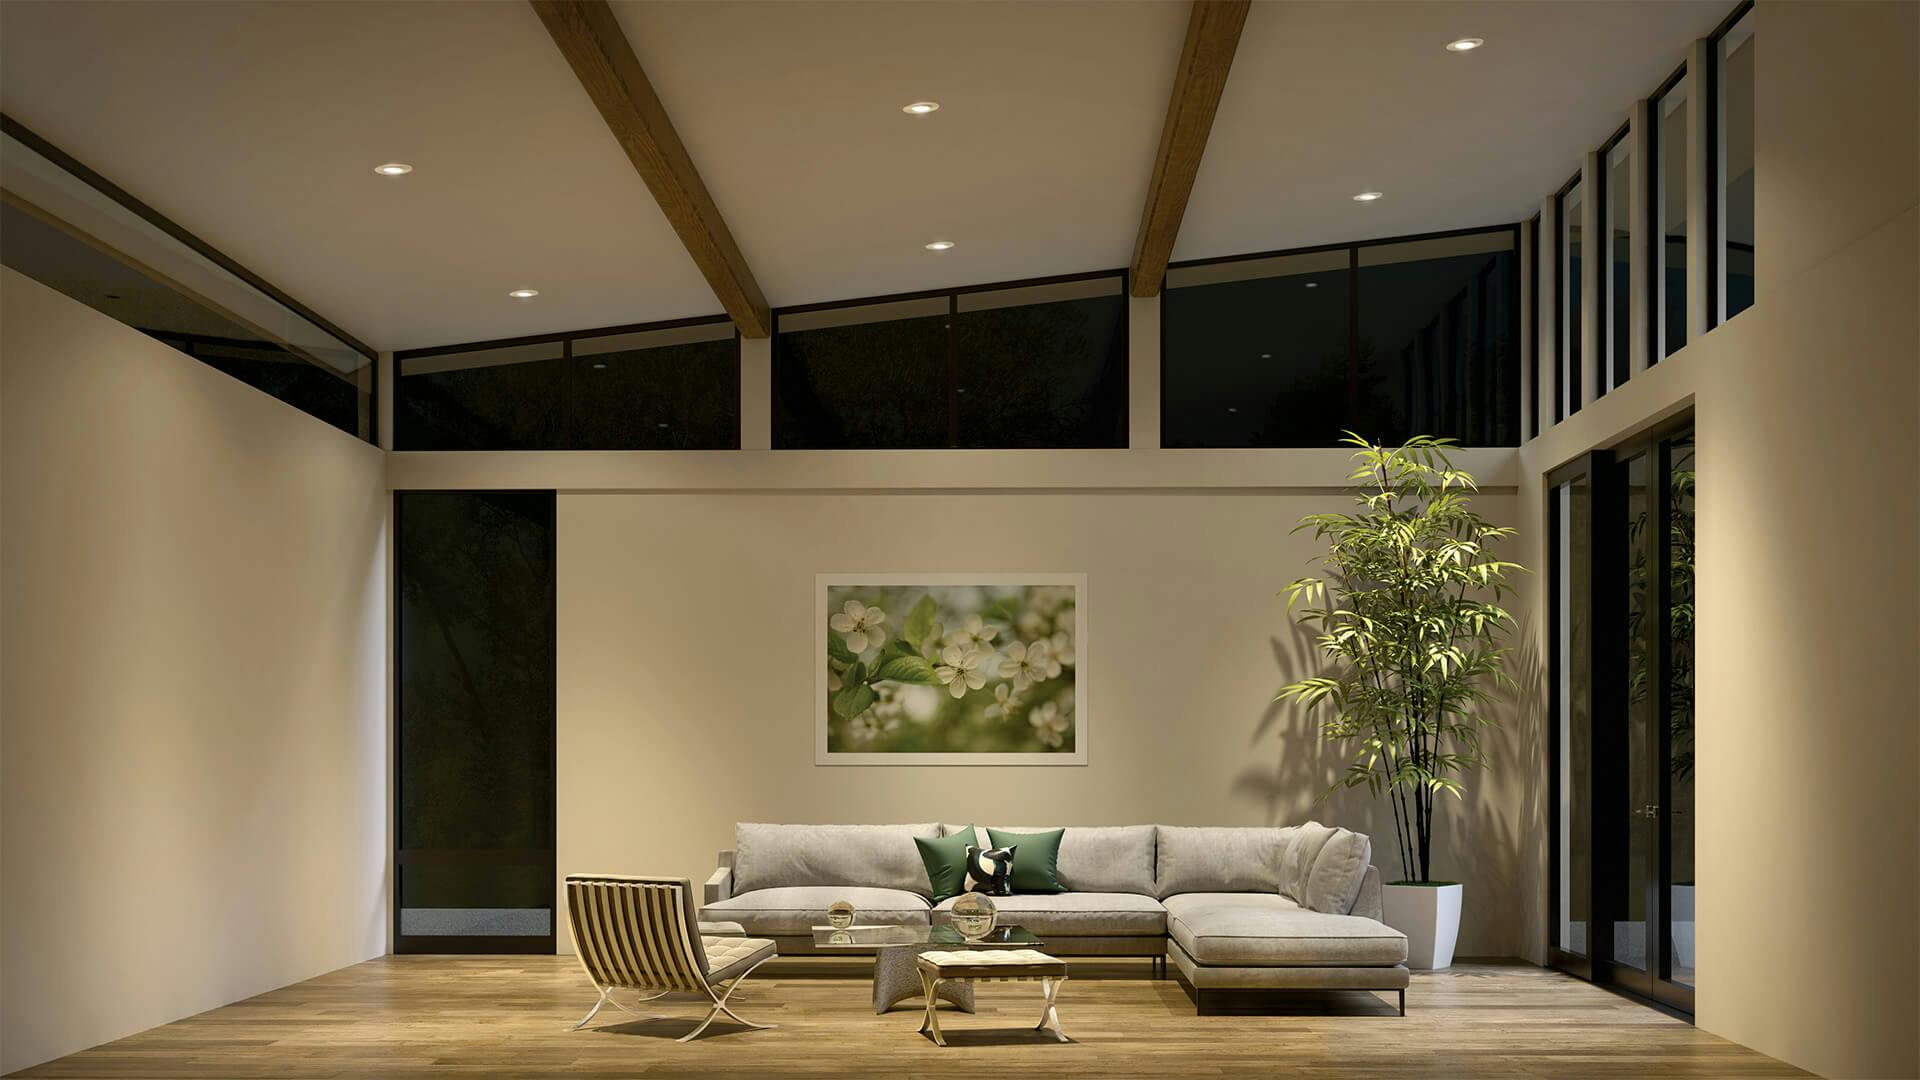 Large living room with downlight lights at night